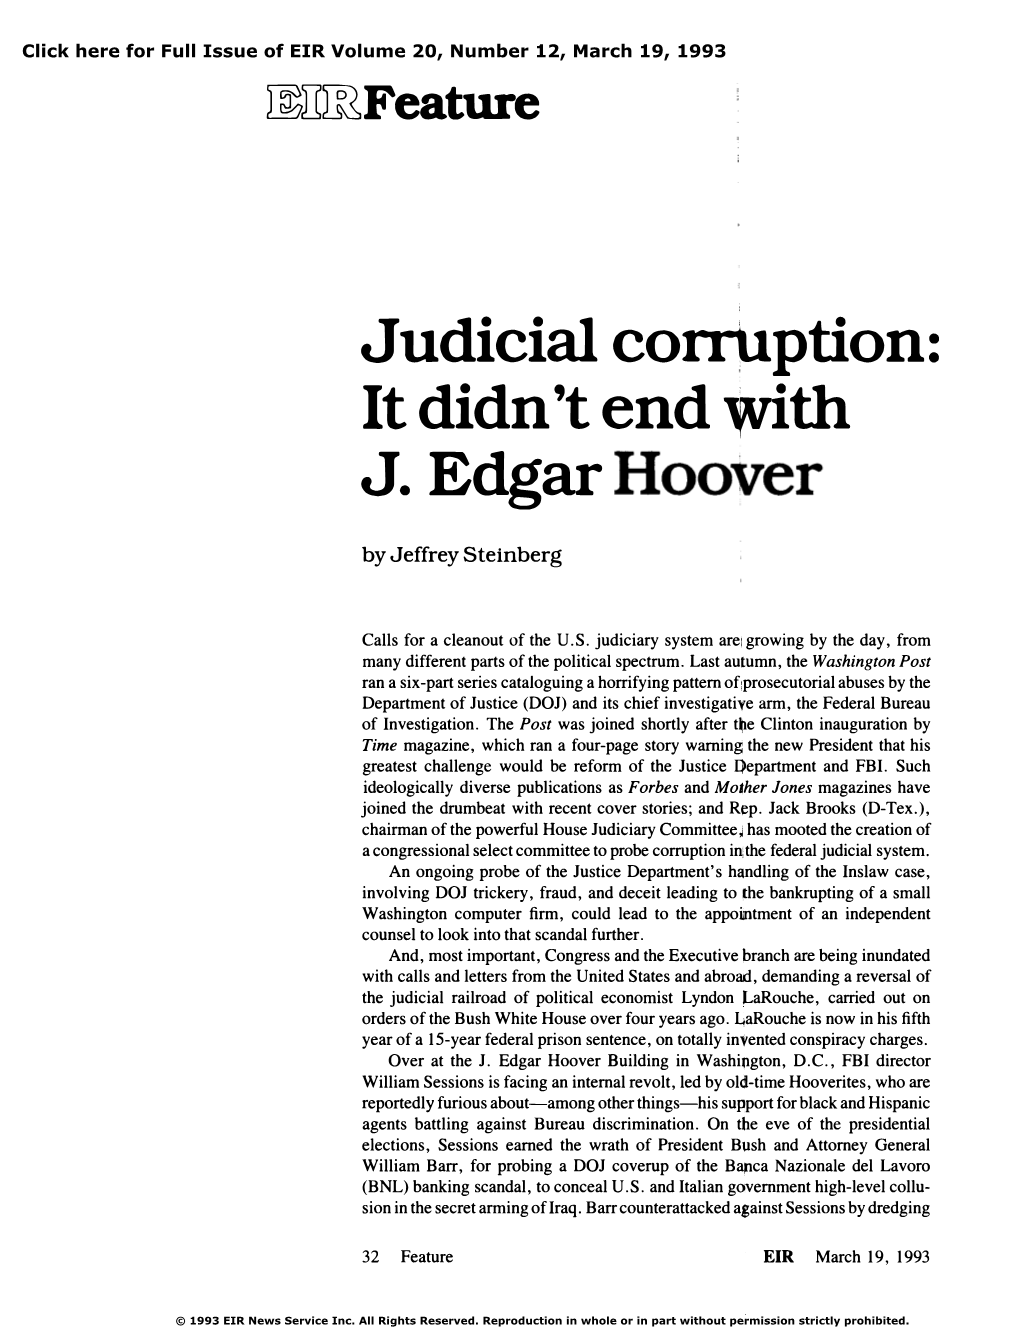 Judicial Corruption: It Didn't End with J. Edgar Hoover